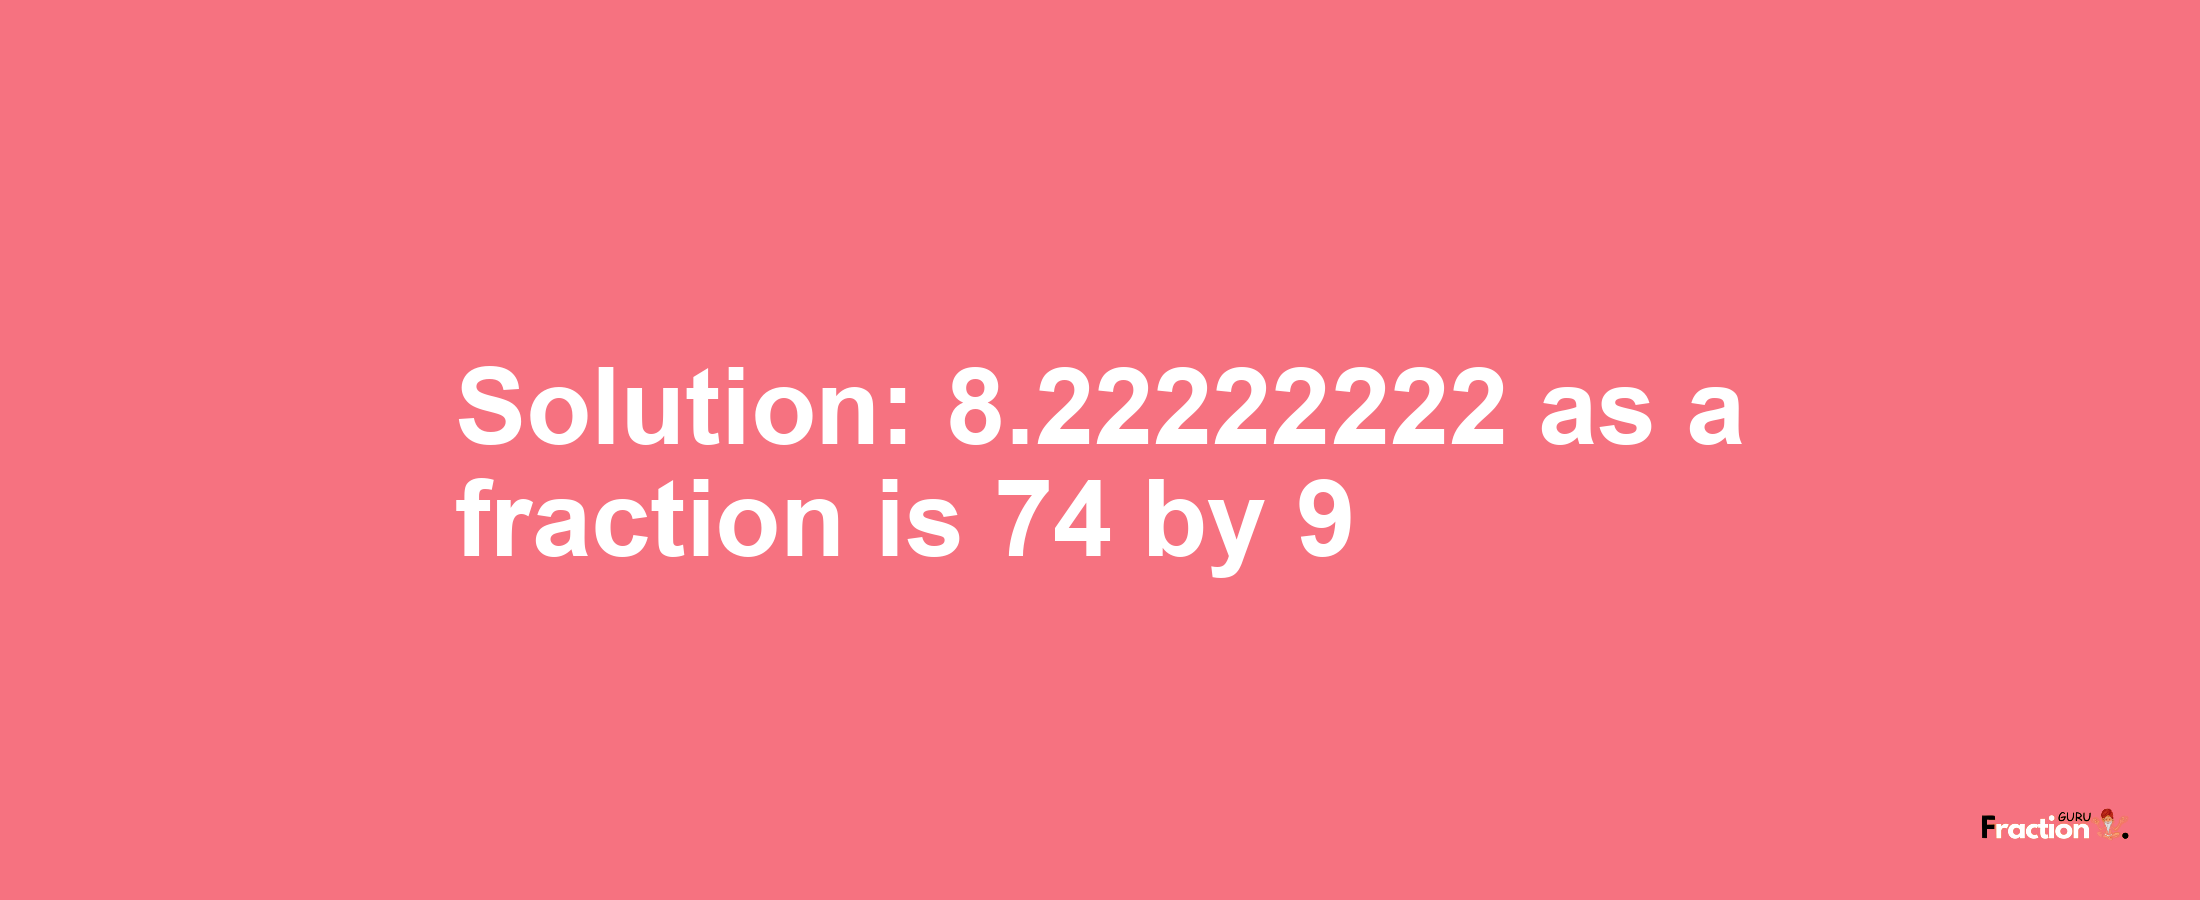 Solution:8.22222222 as a fraction is 74/9